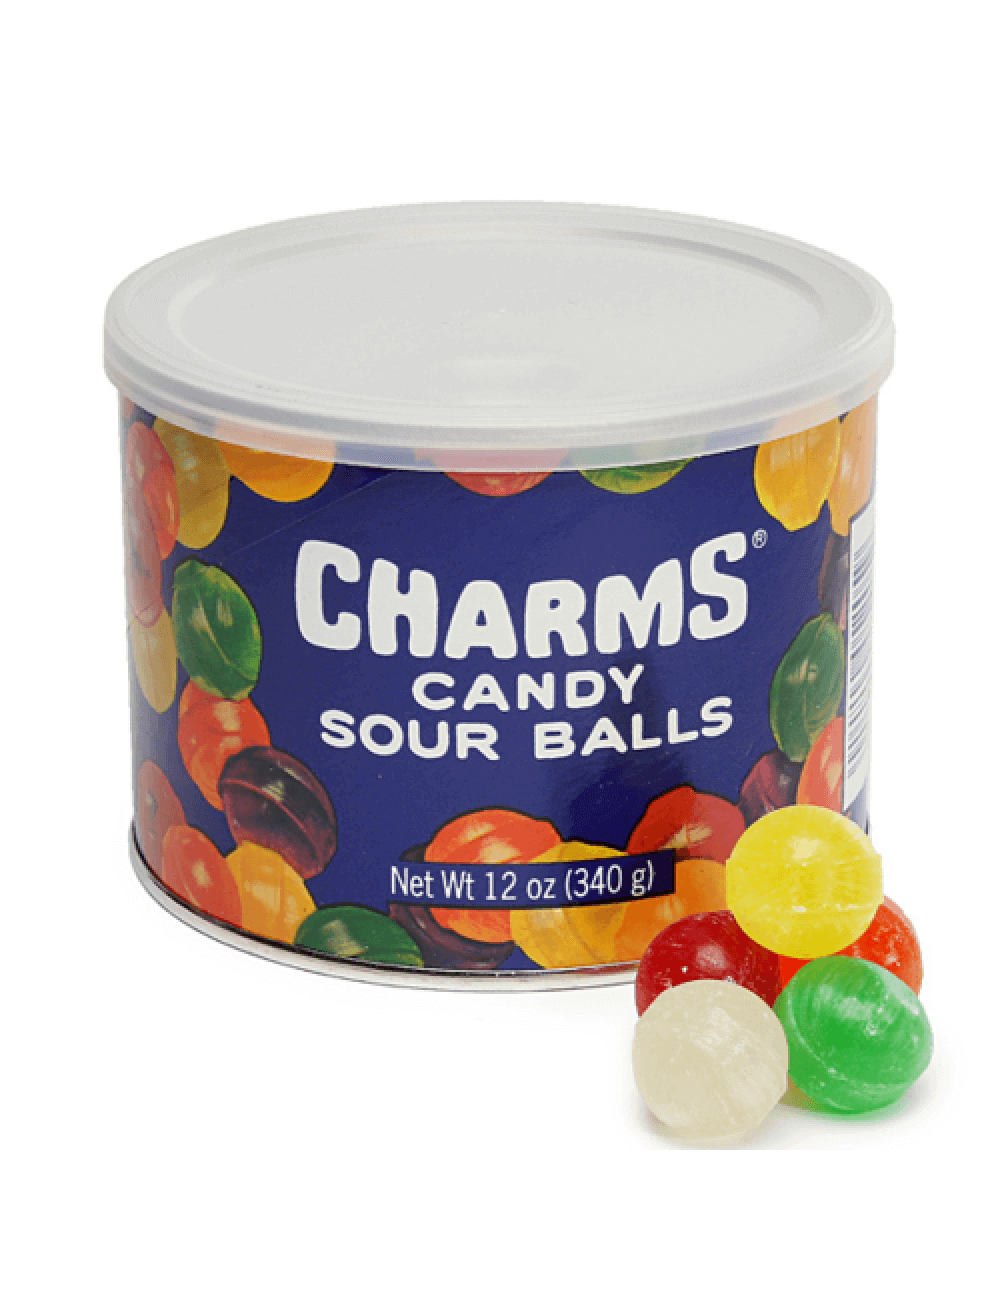 Charms Candy Sour Balls 340g